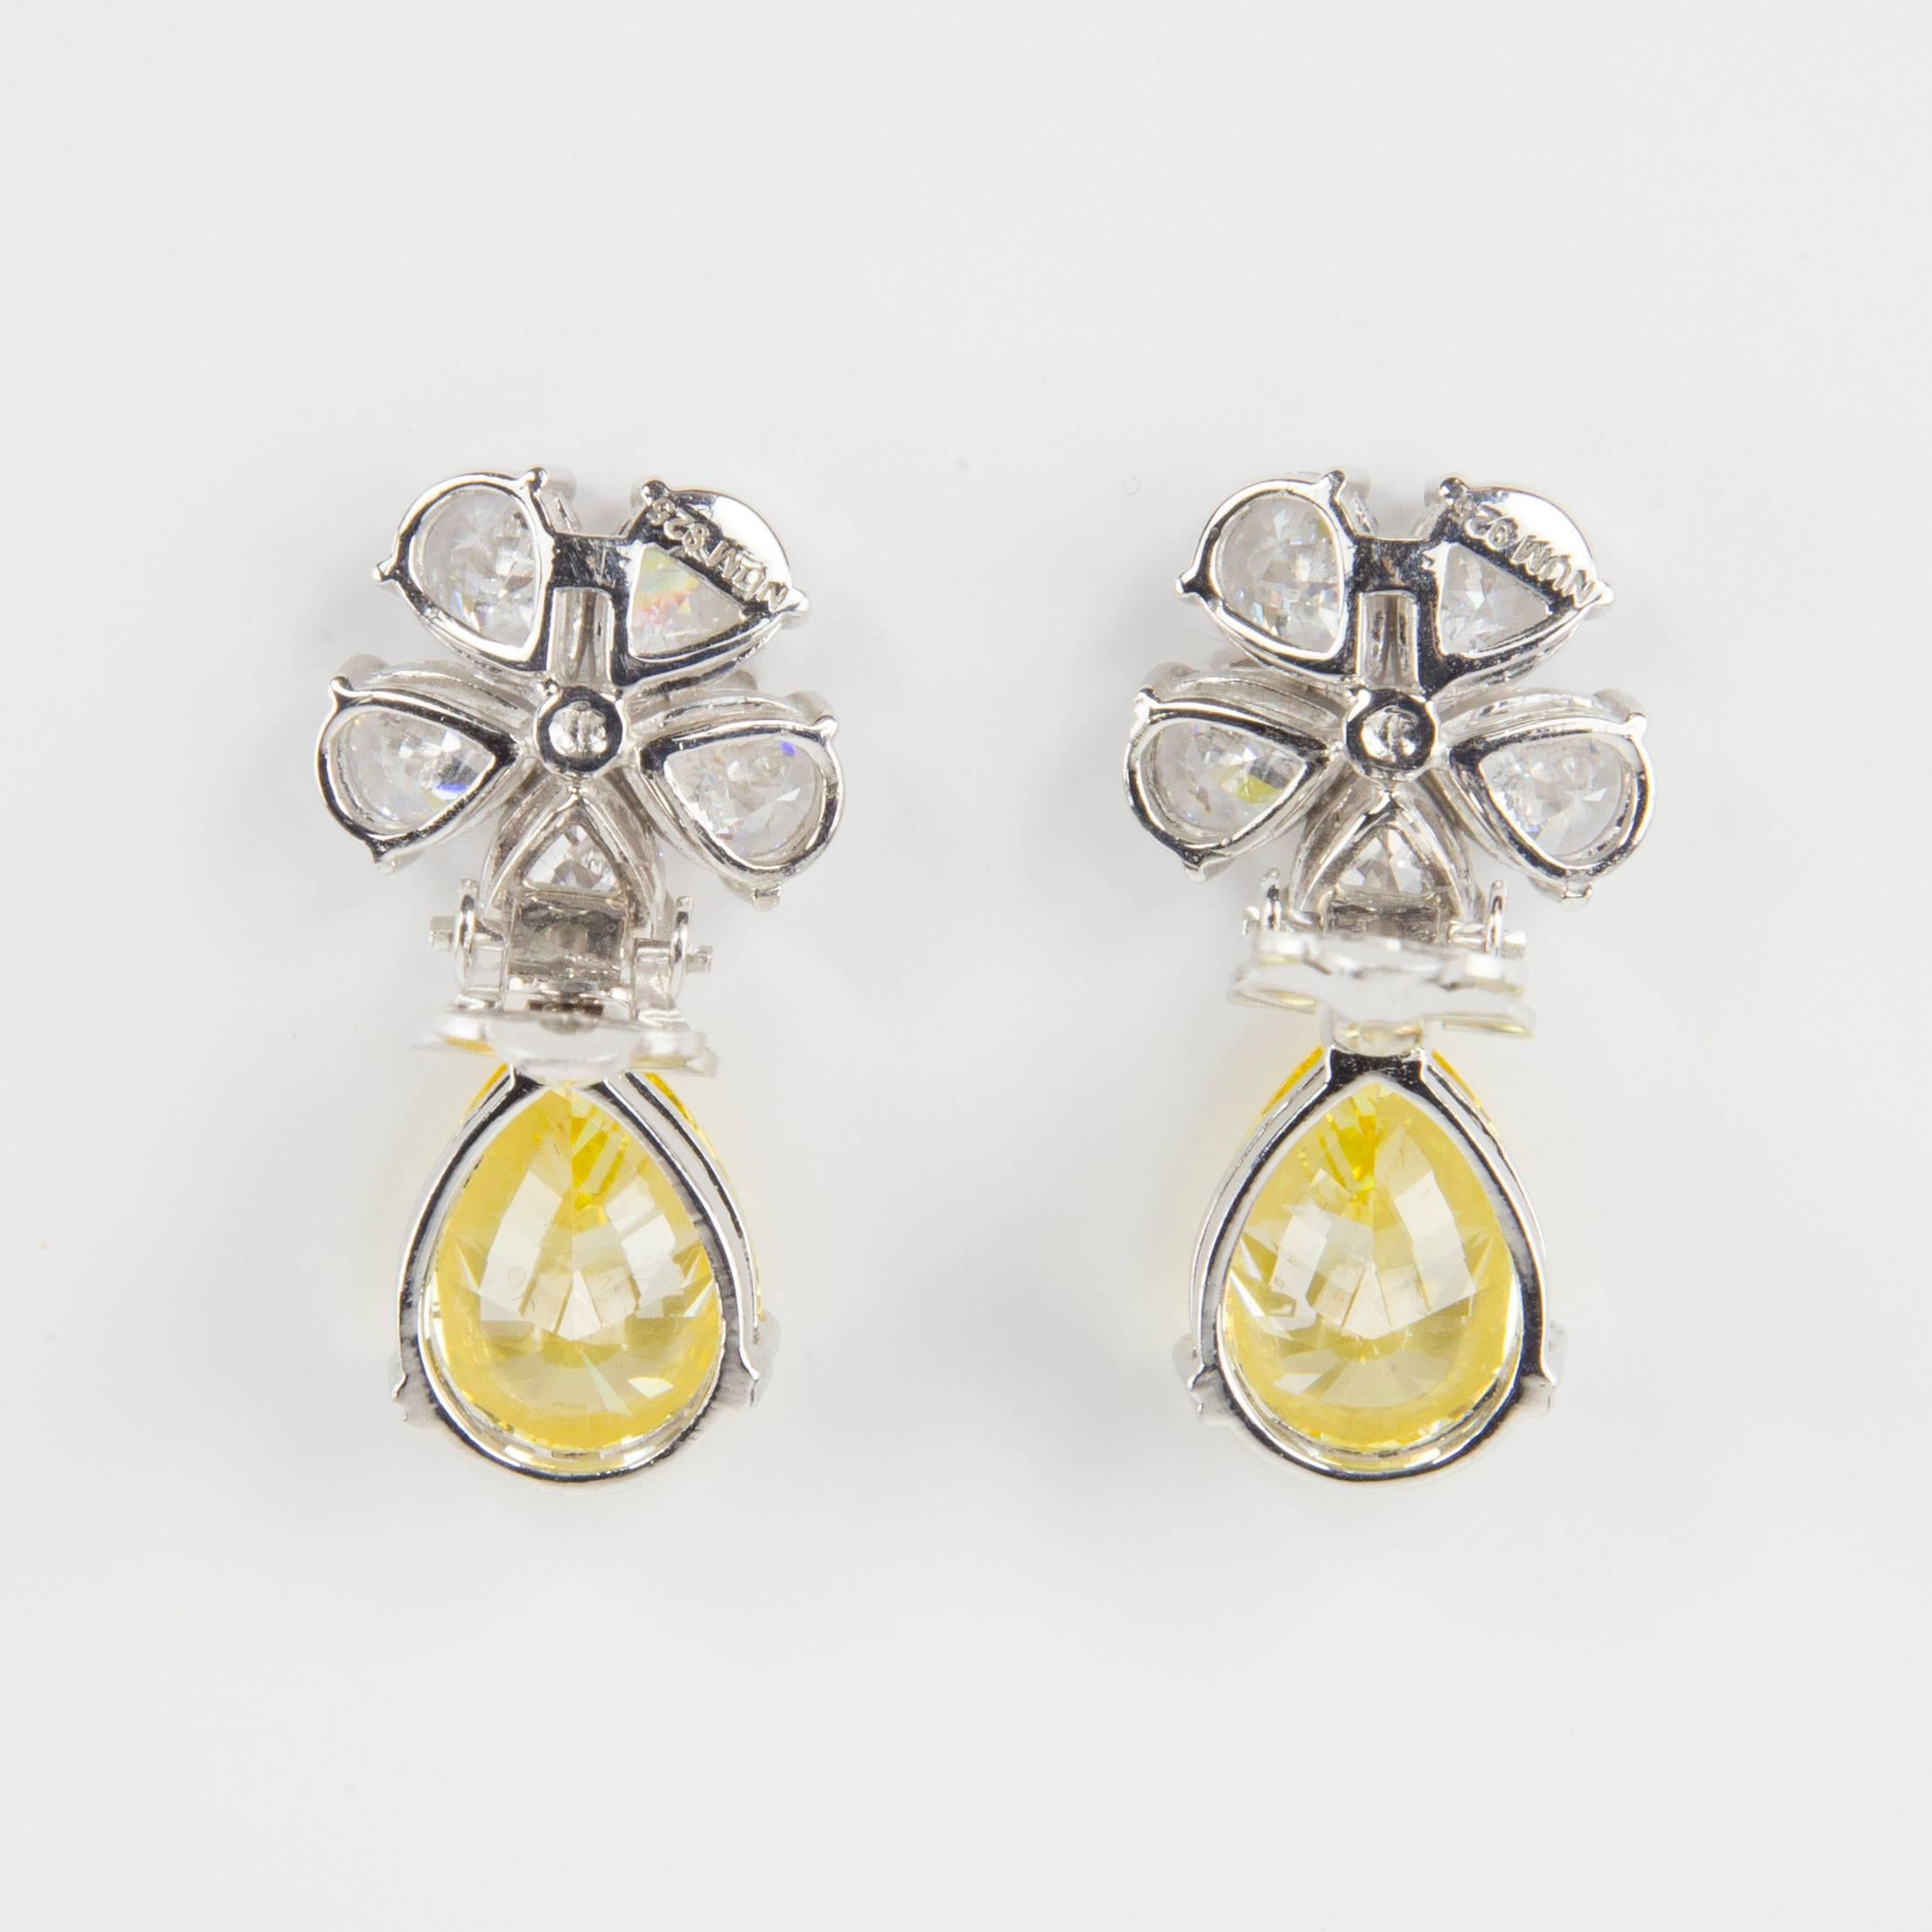 Stunning… Pear shapes Cubic Zirconia form a Daisy, suspending large pear shape faux Yellow Diamond, making a striking statement! All hand set in Sterling Silver. Faux Diamond flower measure .50” diameter and each faux Yellow Diamond drop measures